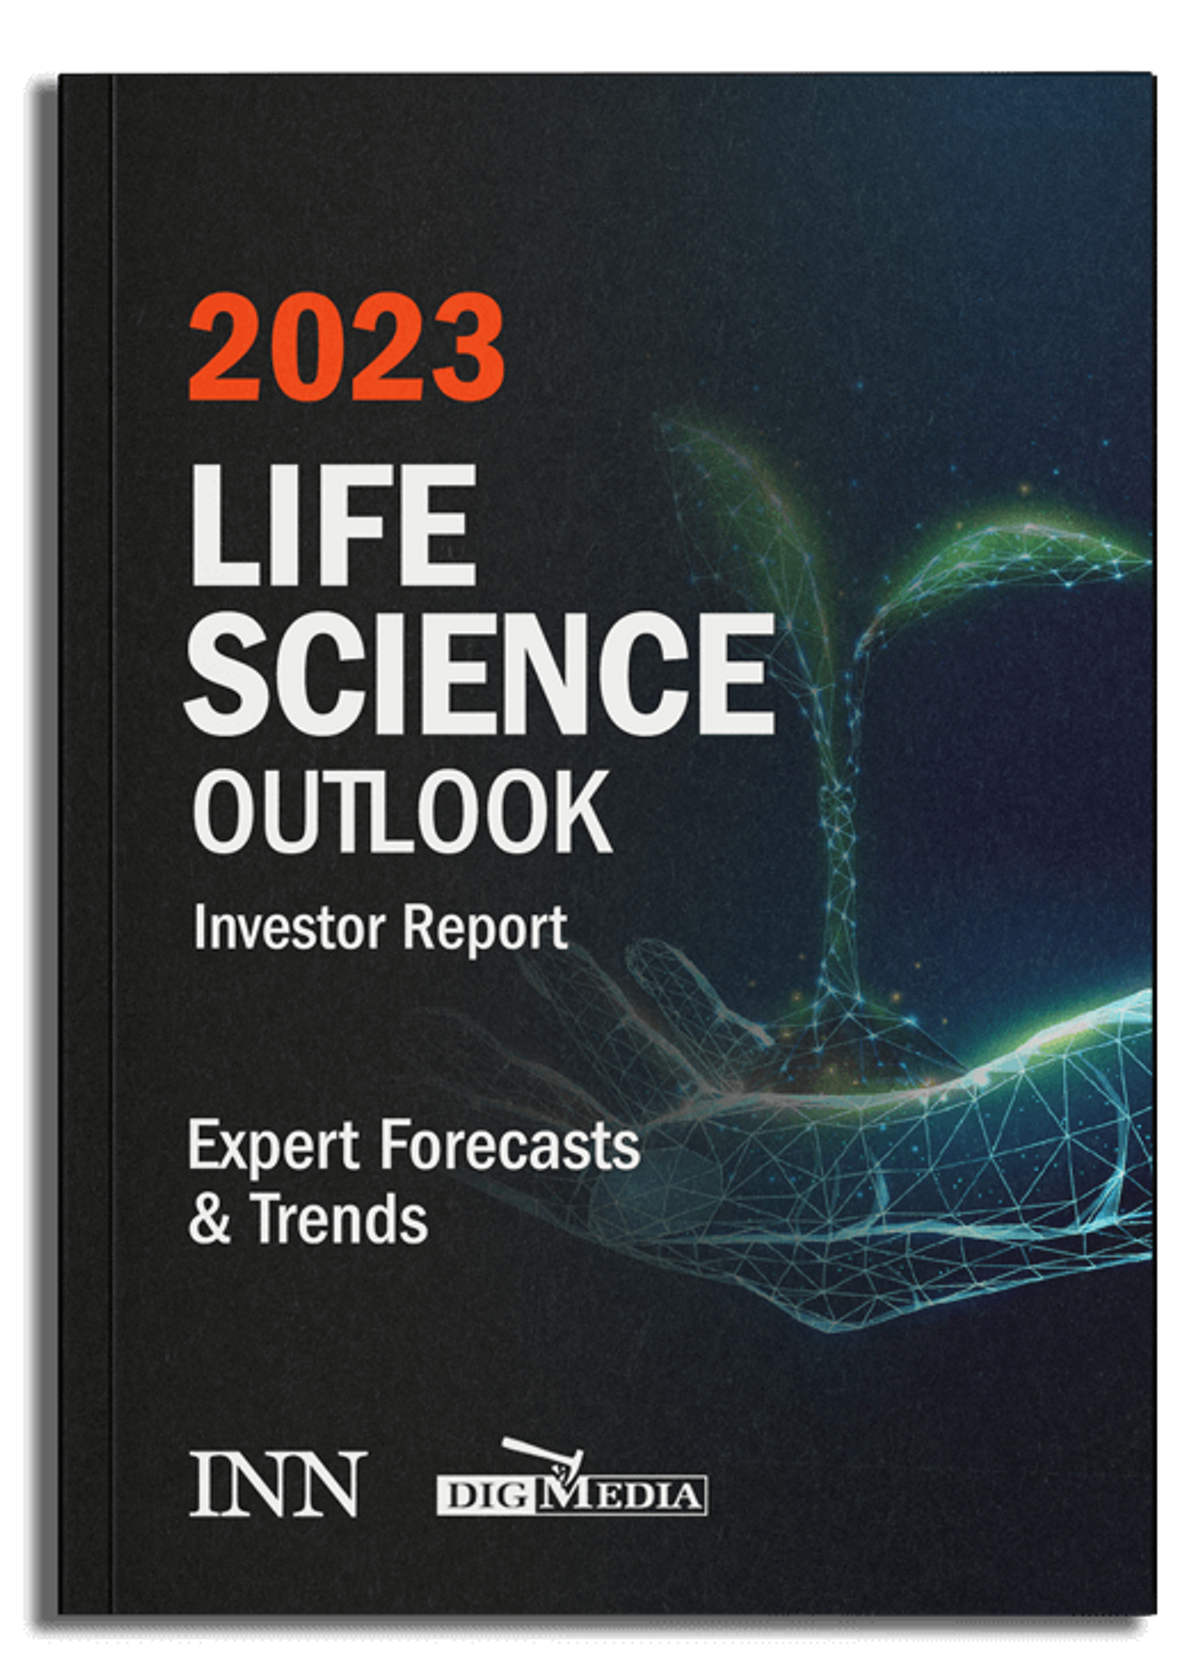 NEW! 2023 Life Science Outlook Report.